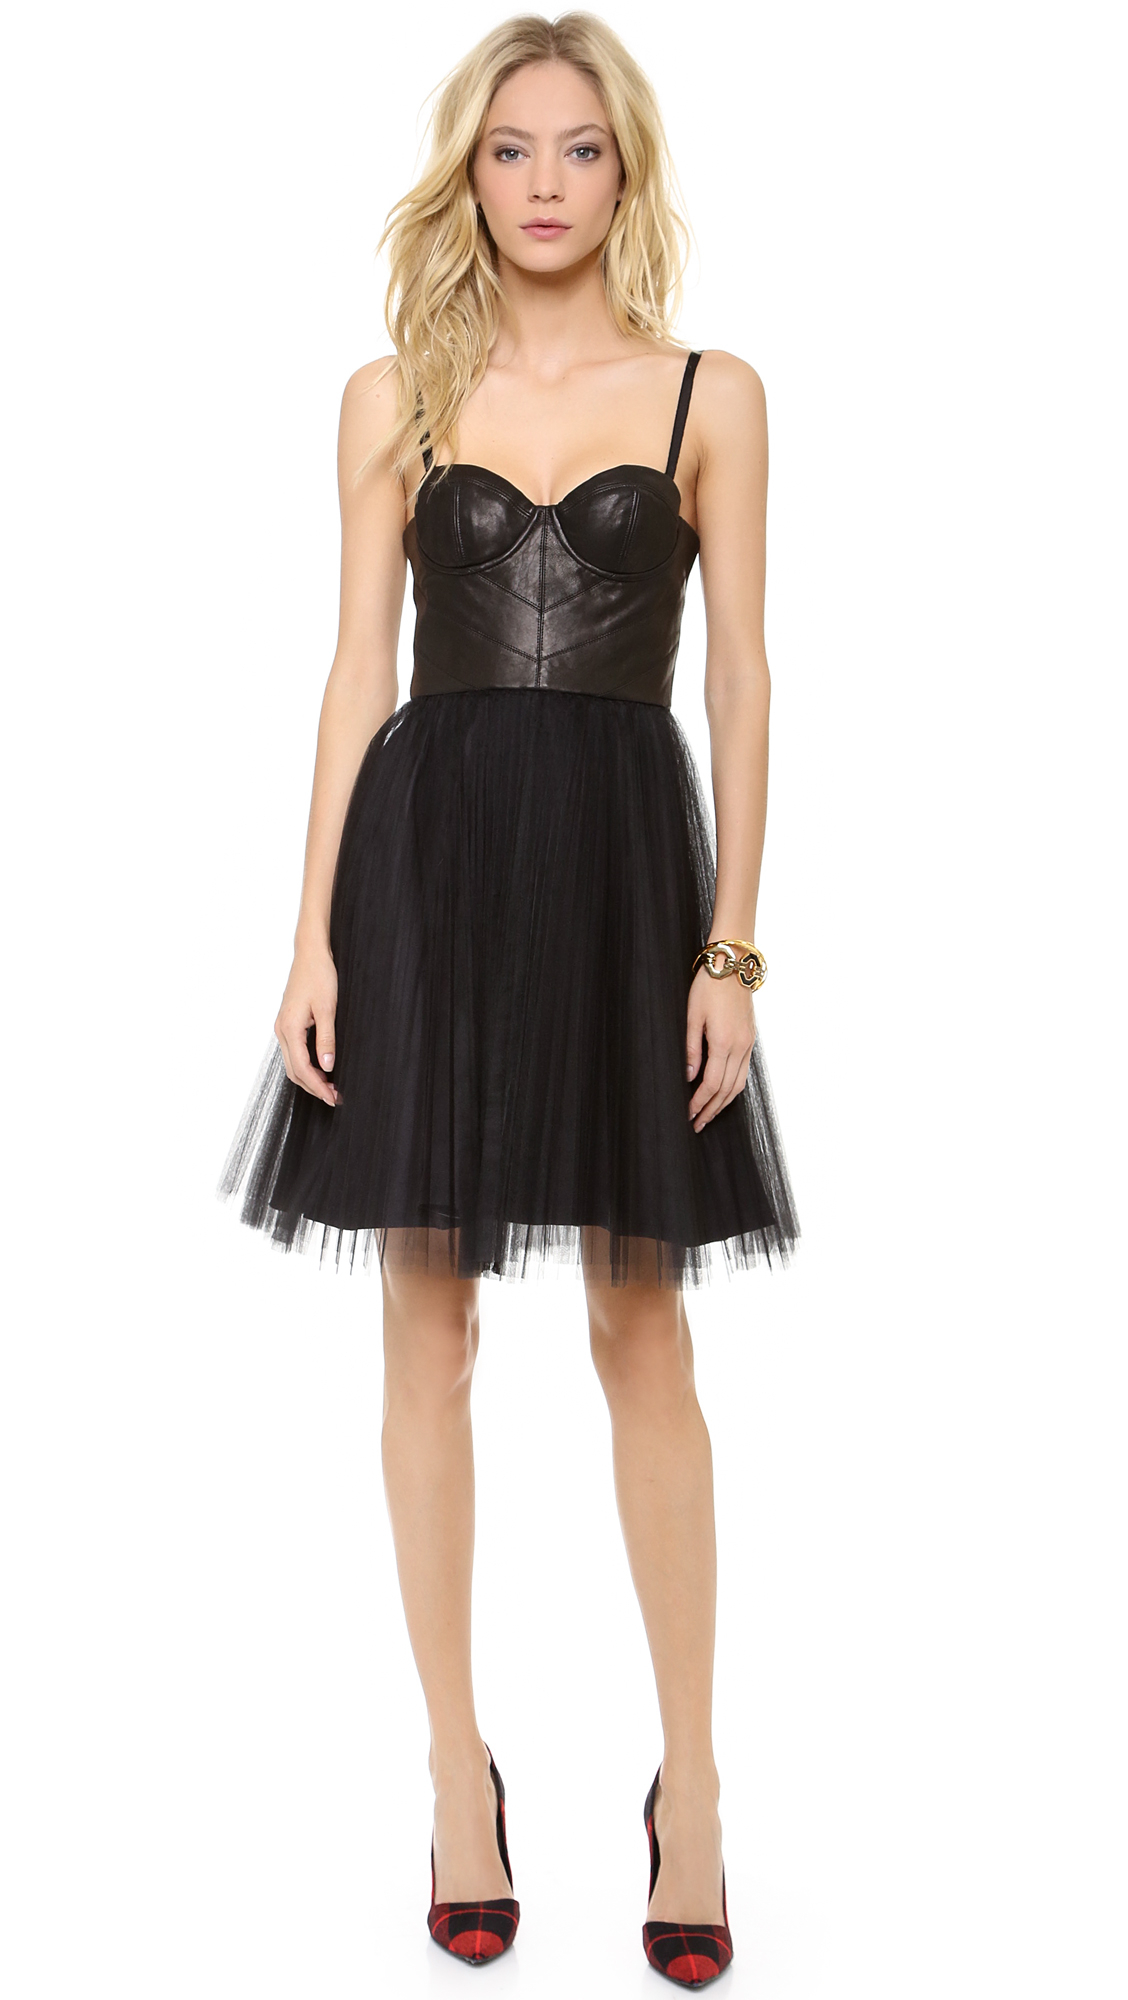 Lyst - Alice + olivia Gia Leather Bustier Dress in Black